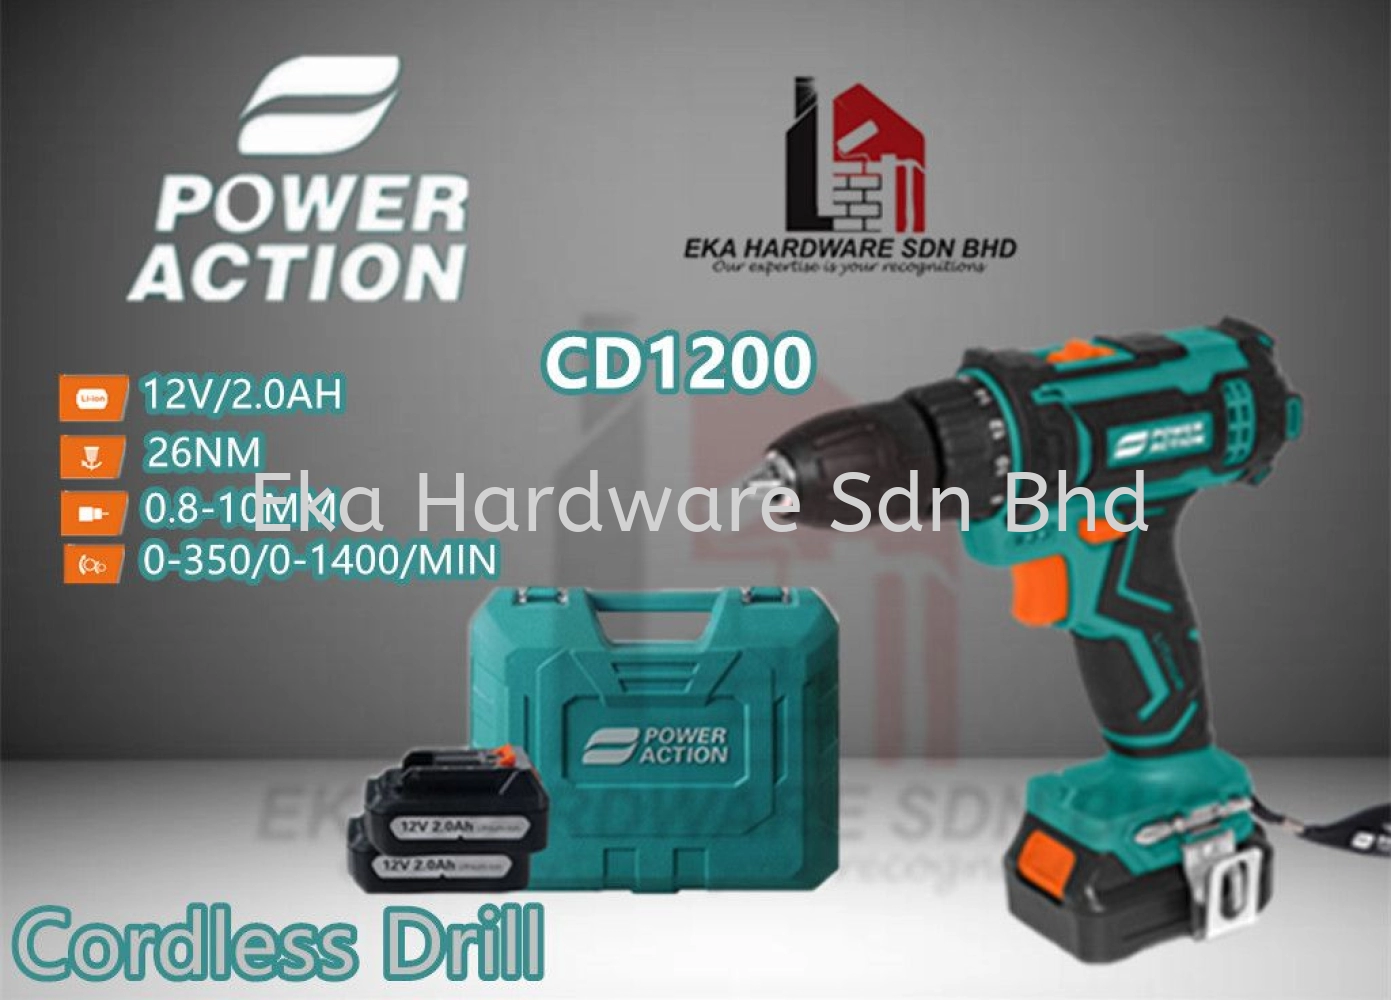 Power Action Cordless Drill (CD1200)